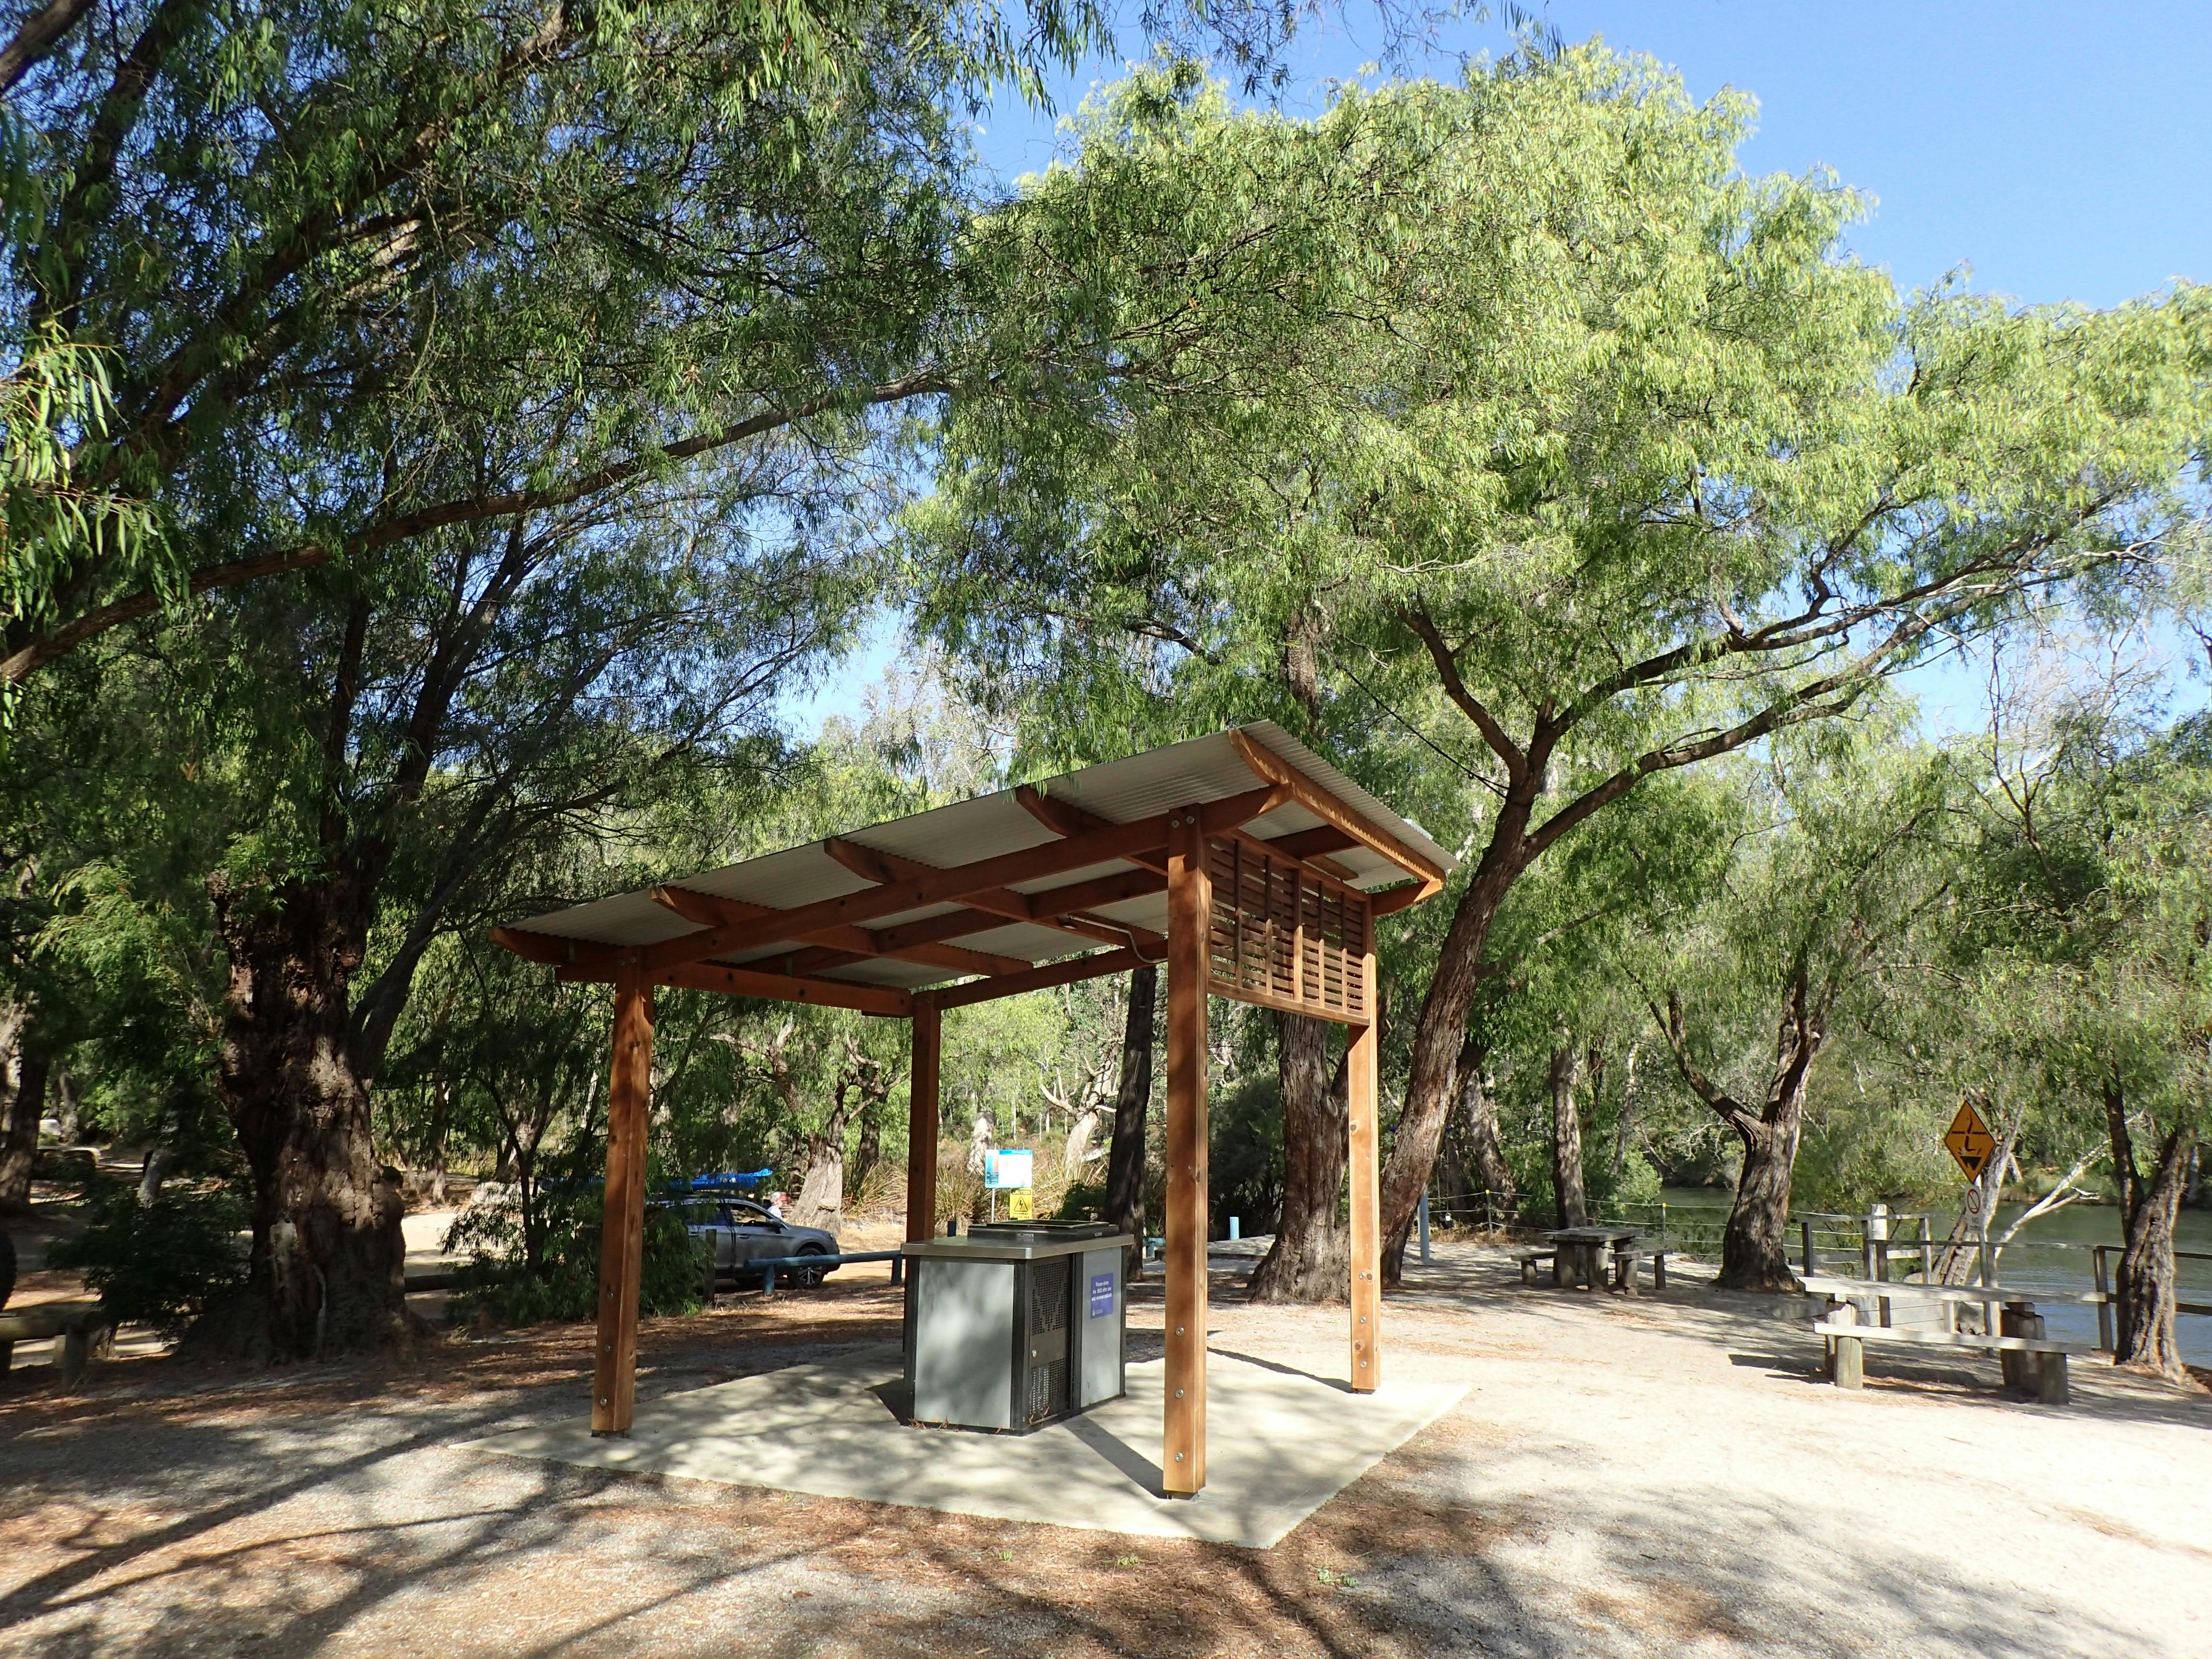 increase to the exisiting BBQ/picnic facilities 